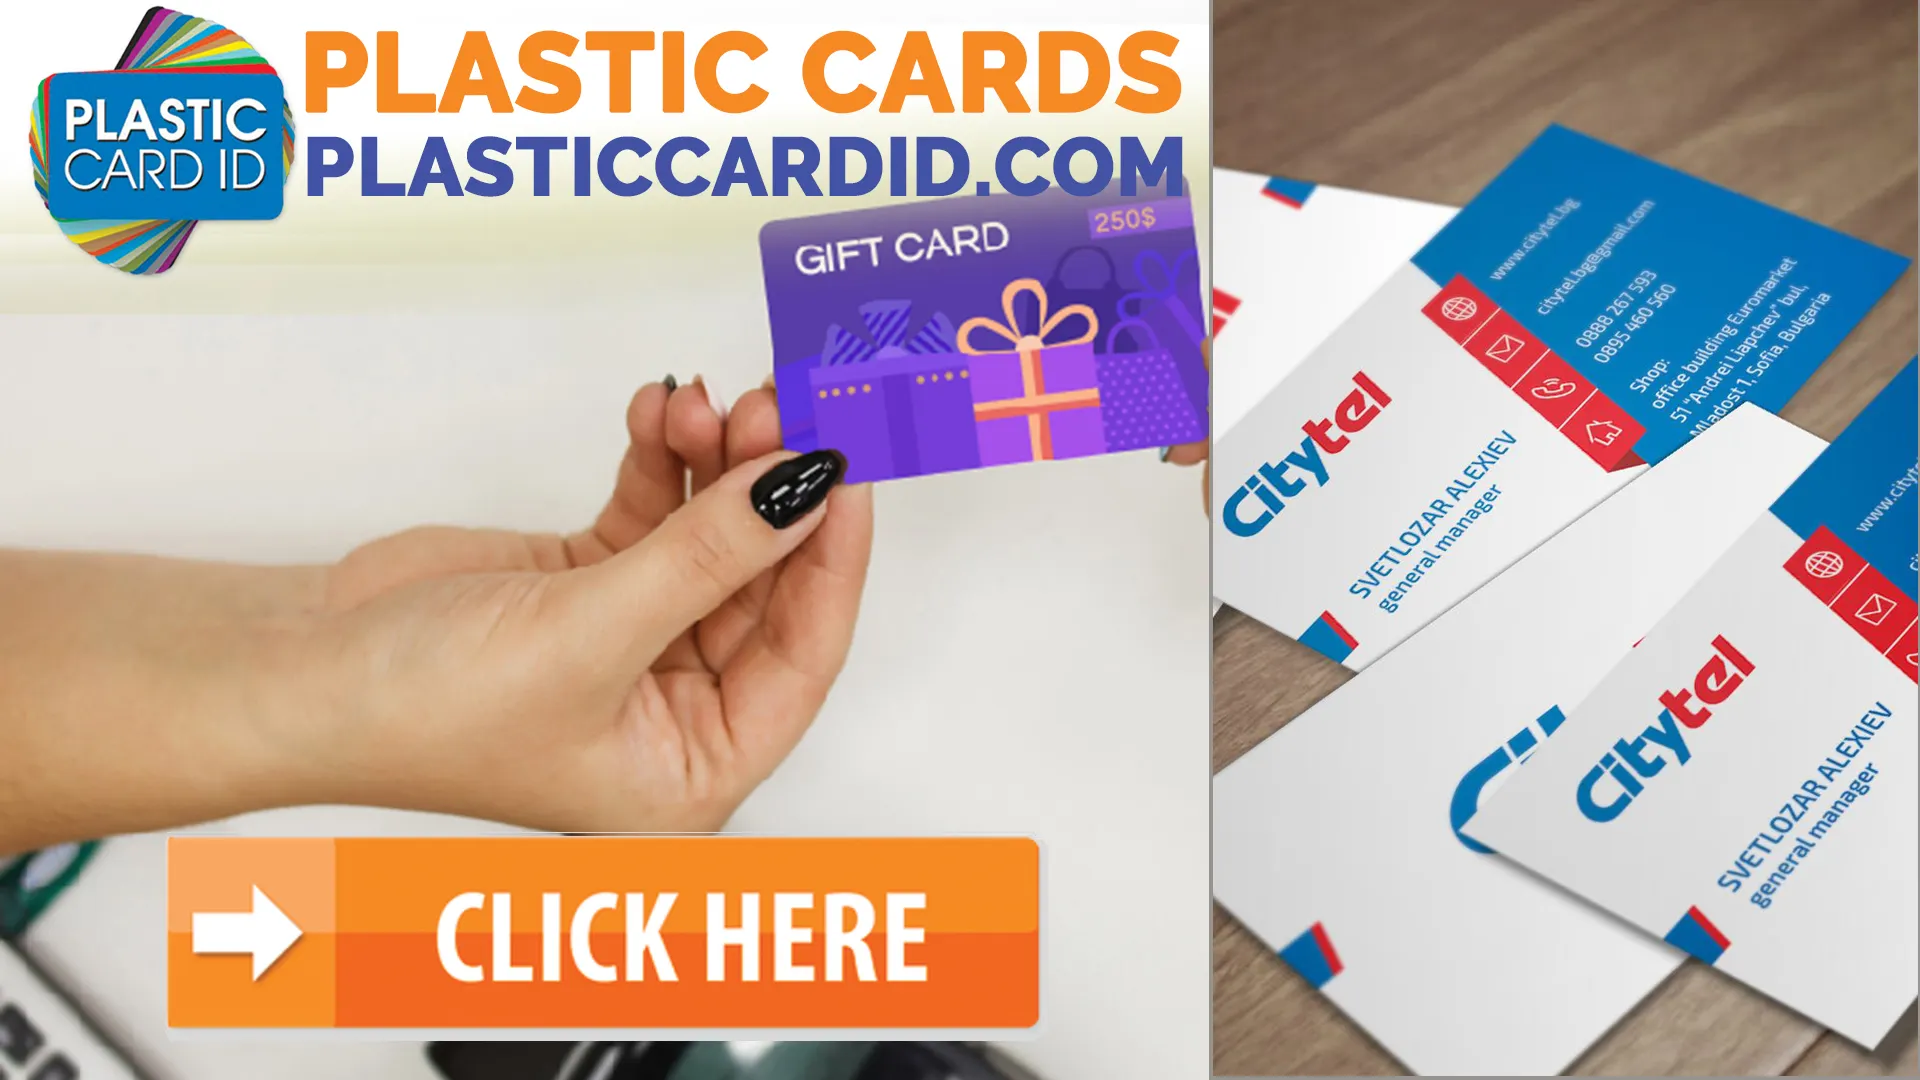 Ensuring a Cohesive Brand Experience Across Card Types